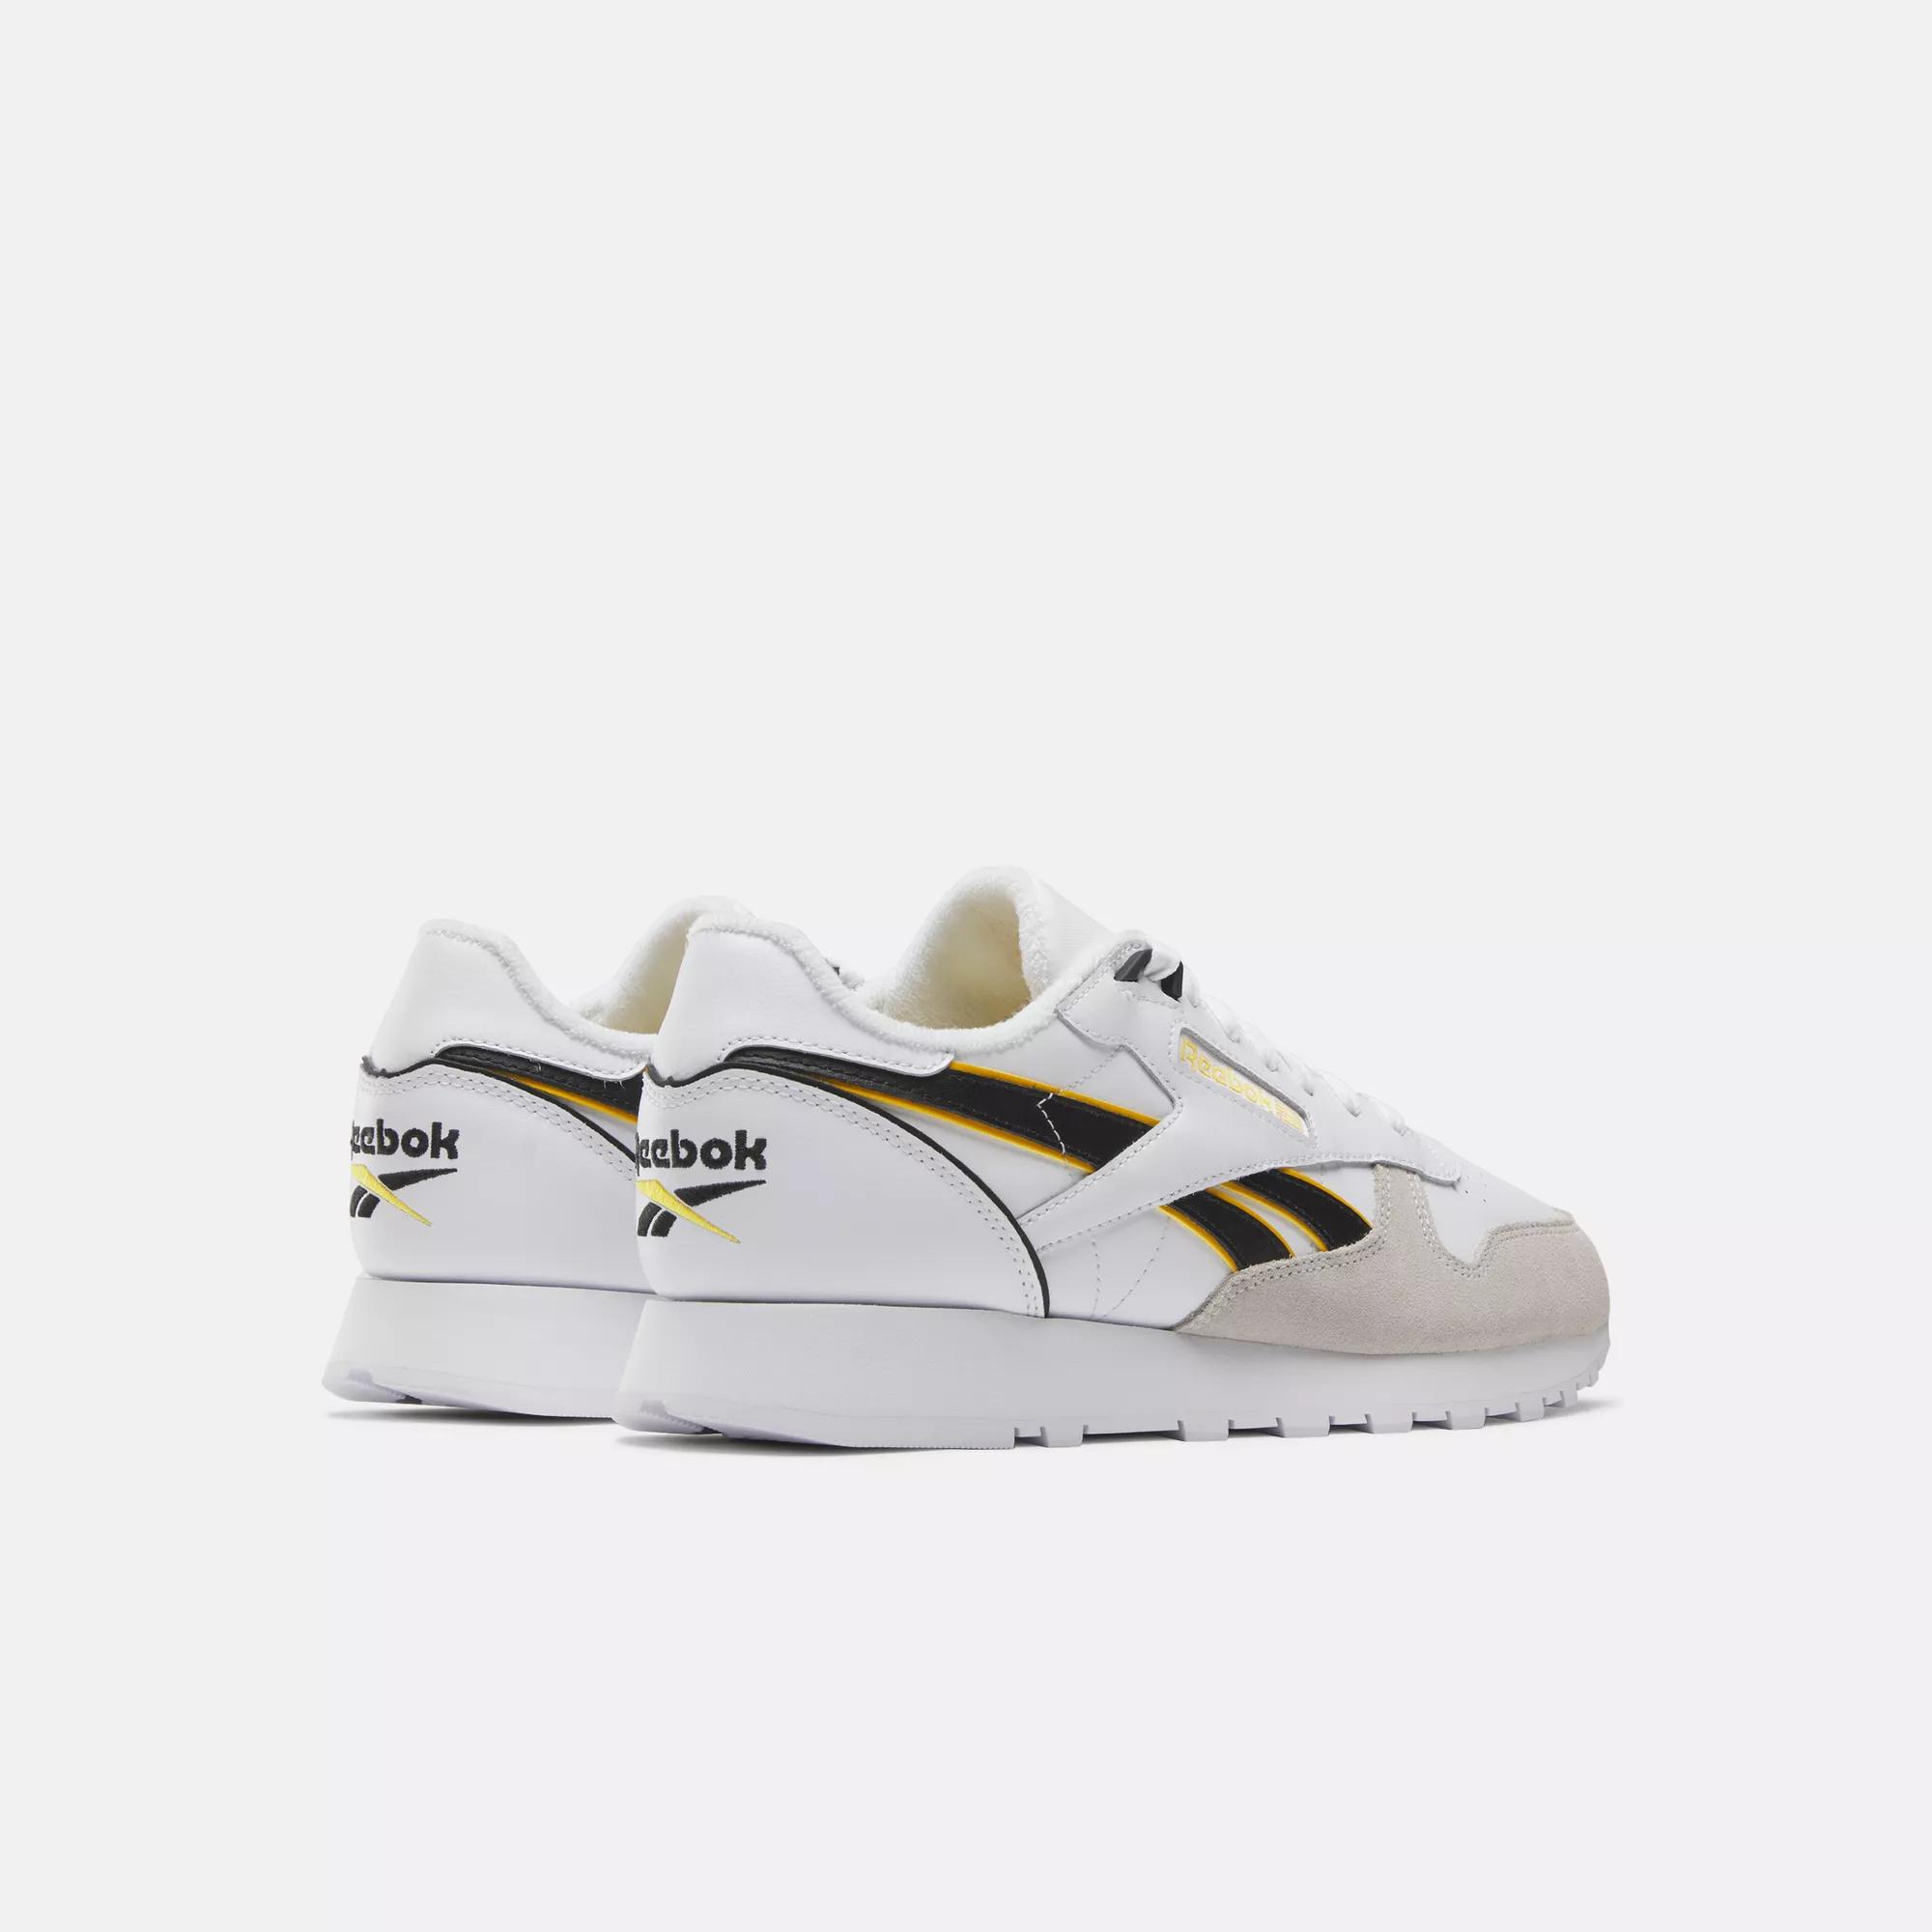 / - | Always / Reebok Yellow Classic White Shoes Black Leather